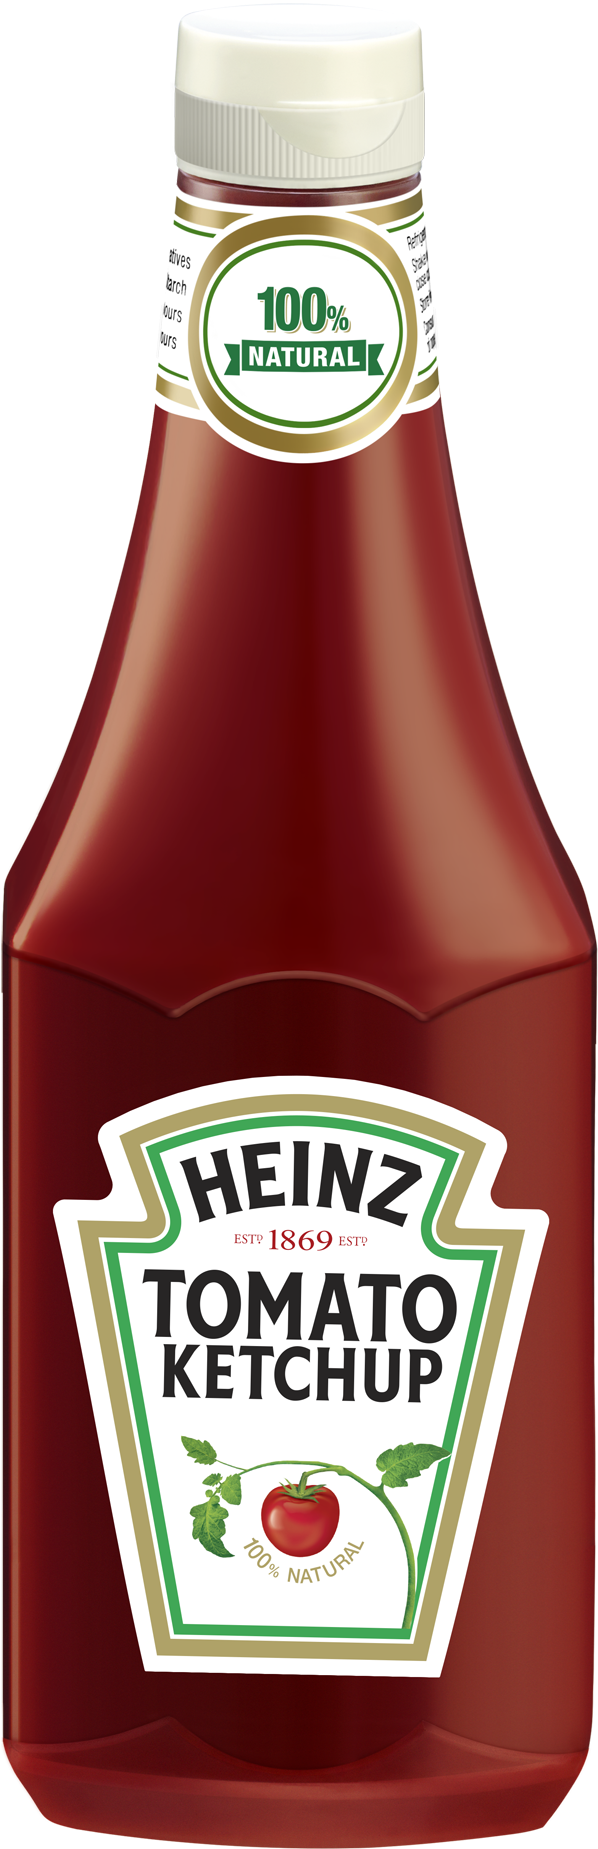 Heinz Natural Tomato Ketchup Bottle PNG